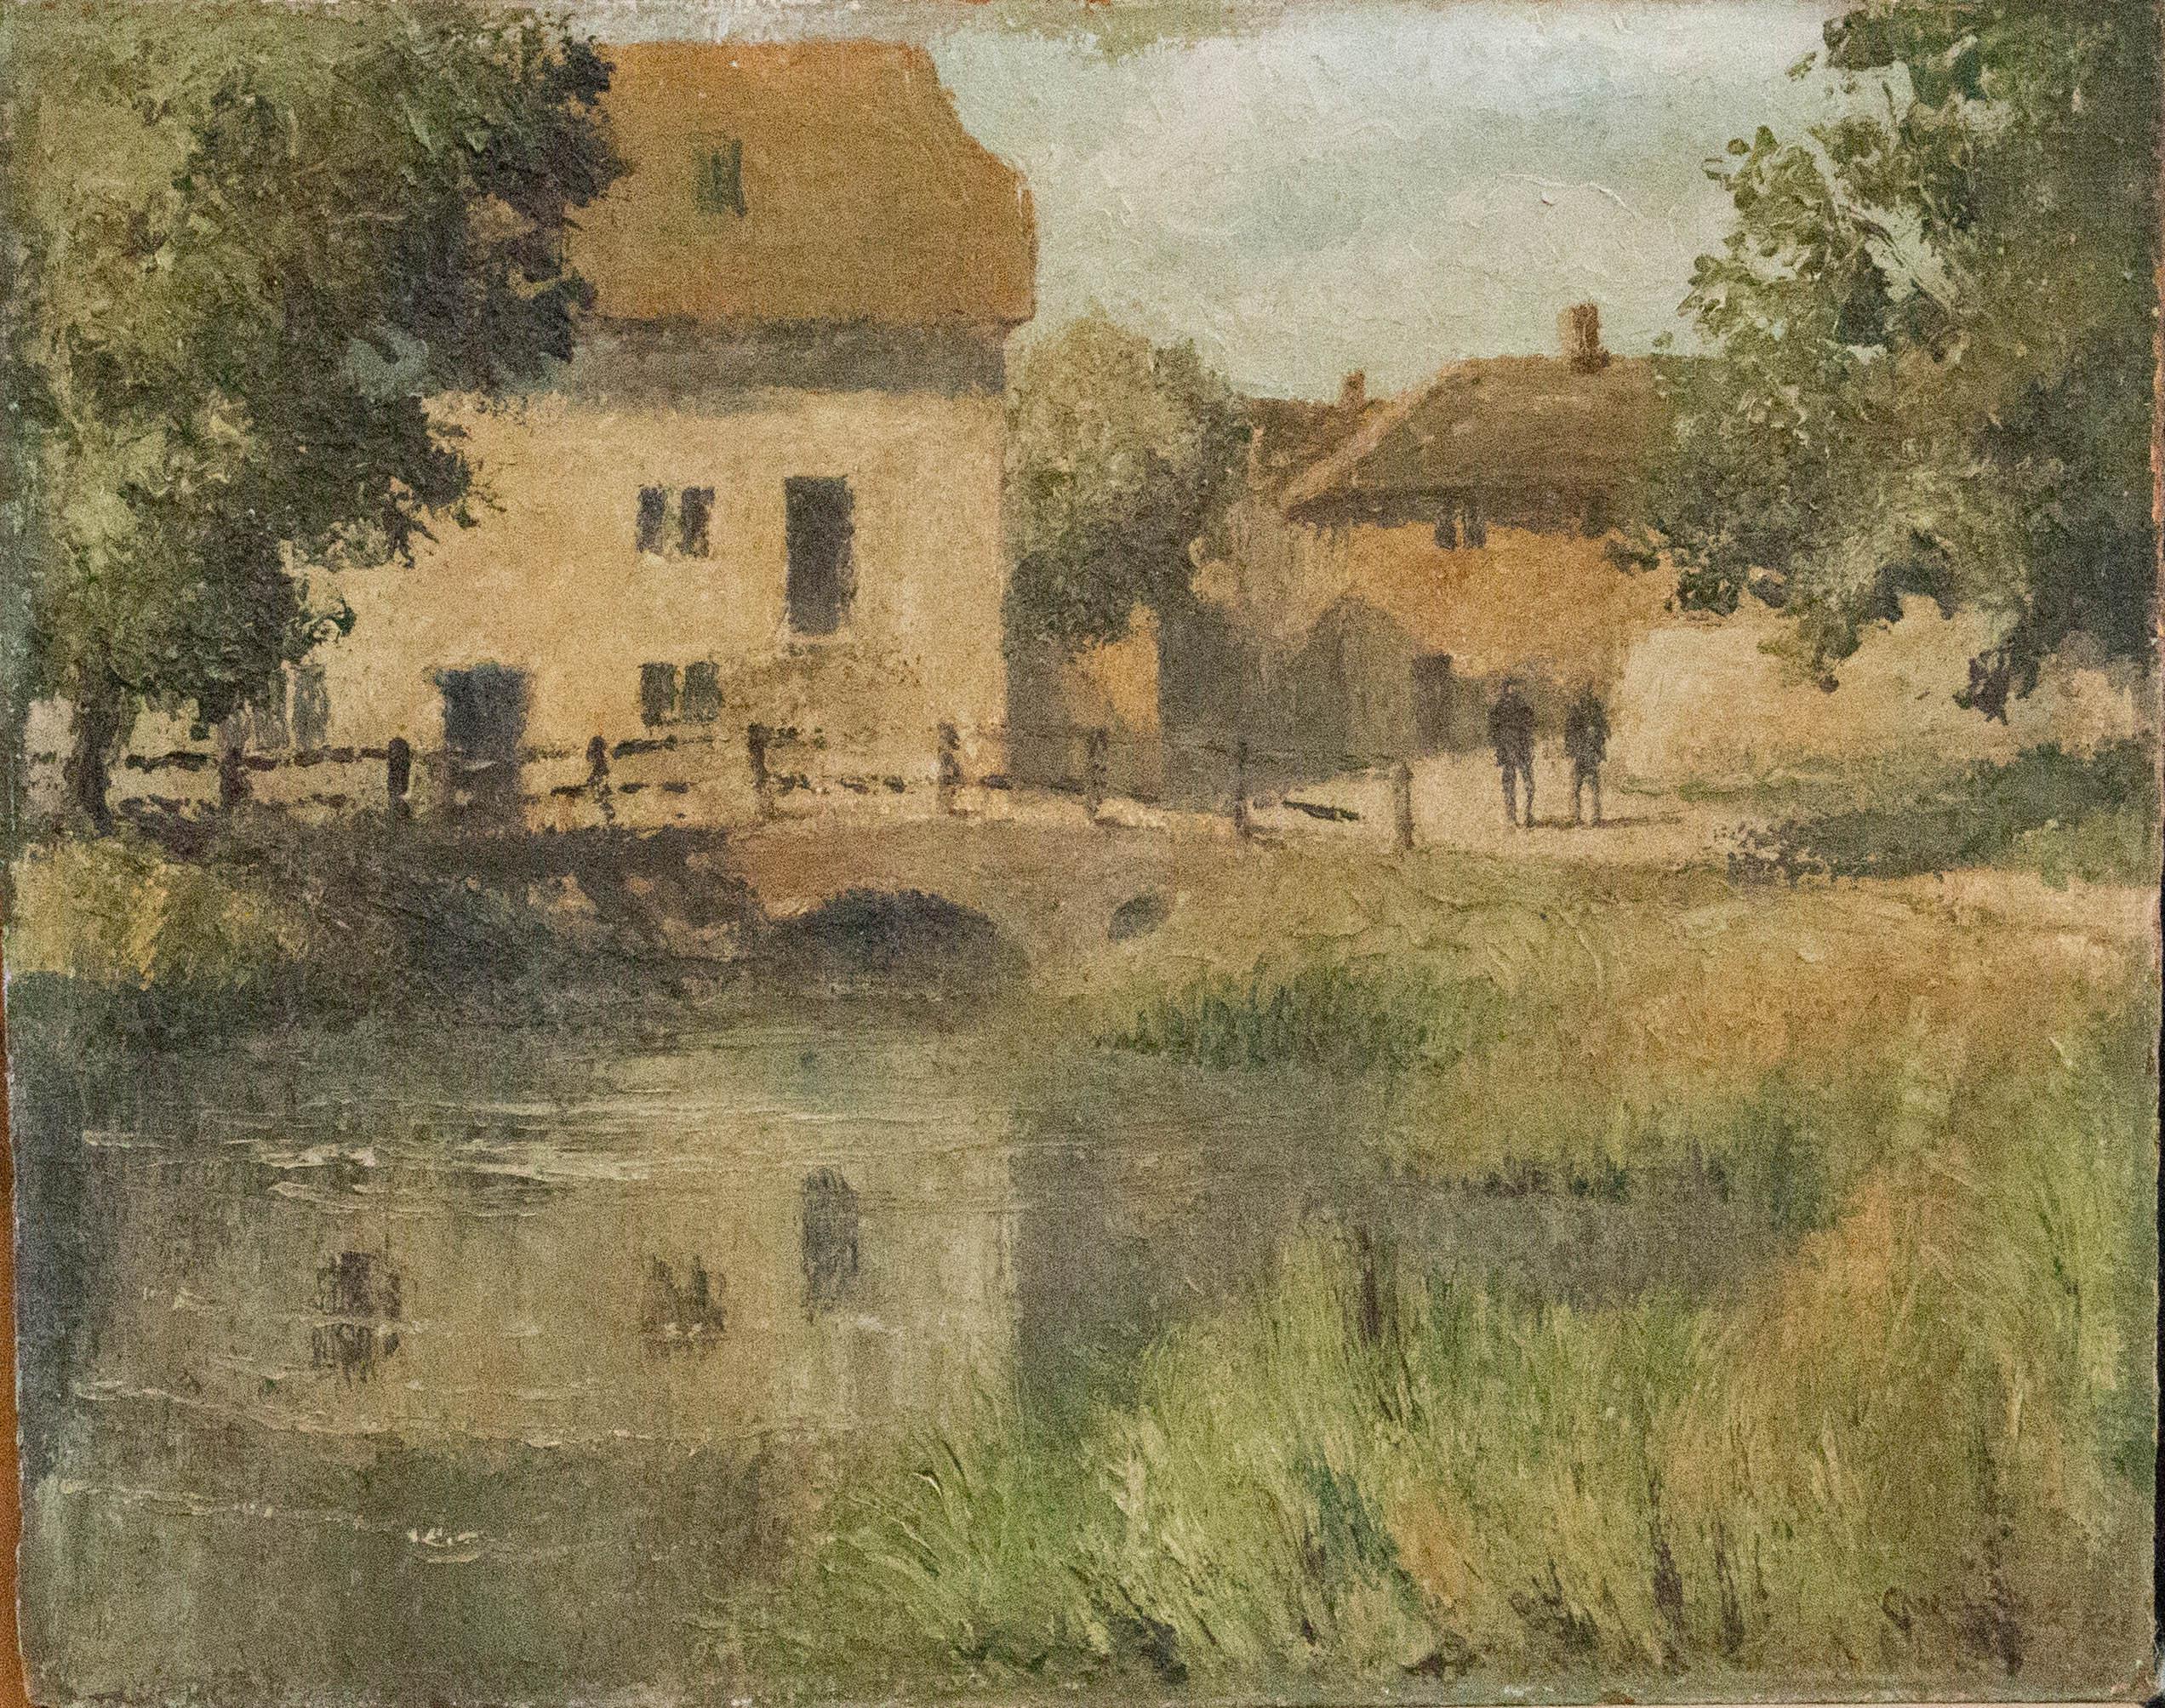 An impressionistic painting with impasto depicting a river flowing through a farm or village, crossed by a bridge. Two figures walk together to the right-hand side of the composition. Signed illegibly to the lower-right corner. On board.




